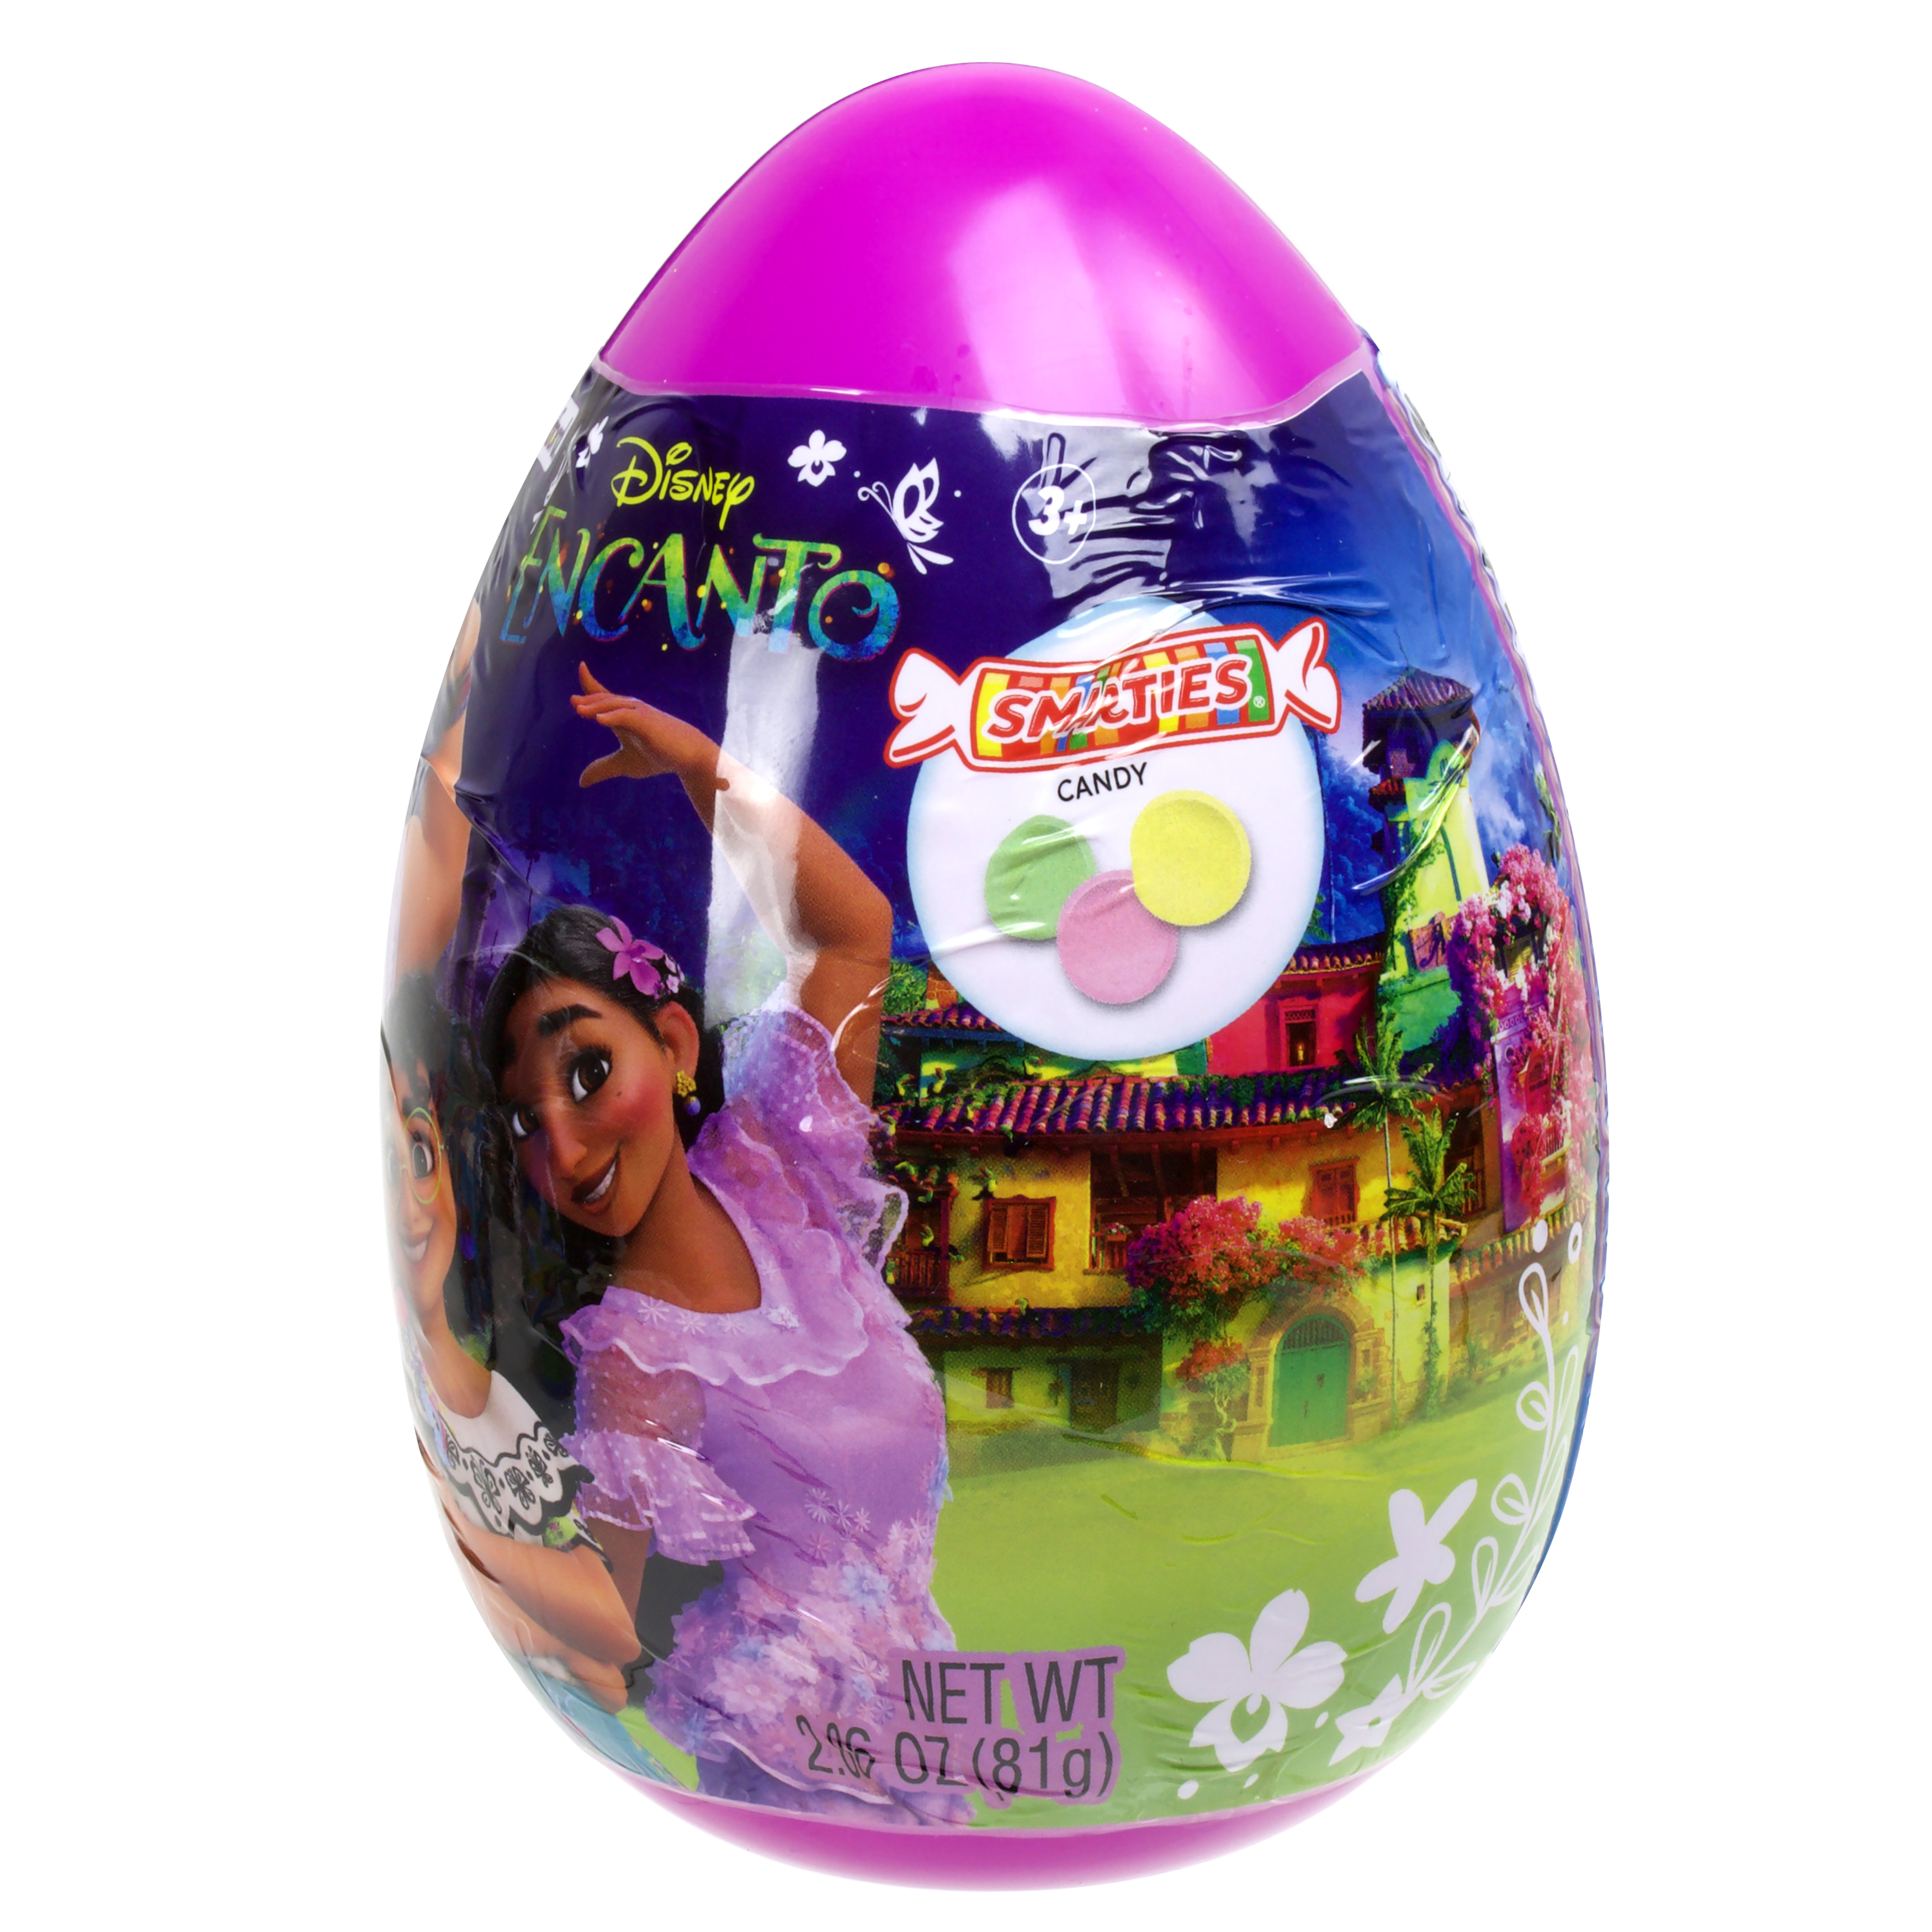 Frankford Disney Encanto Giant Easter Egg with Smarties Candy, 2.86 oz - image 1 of 6